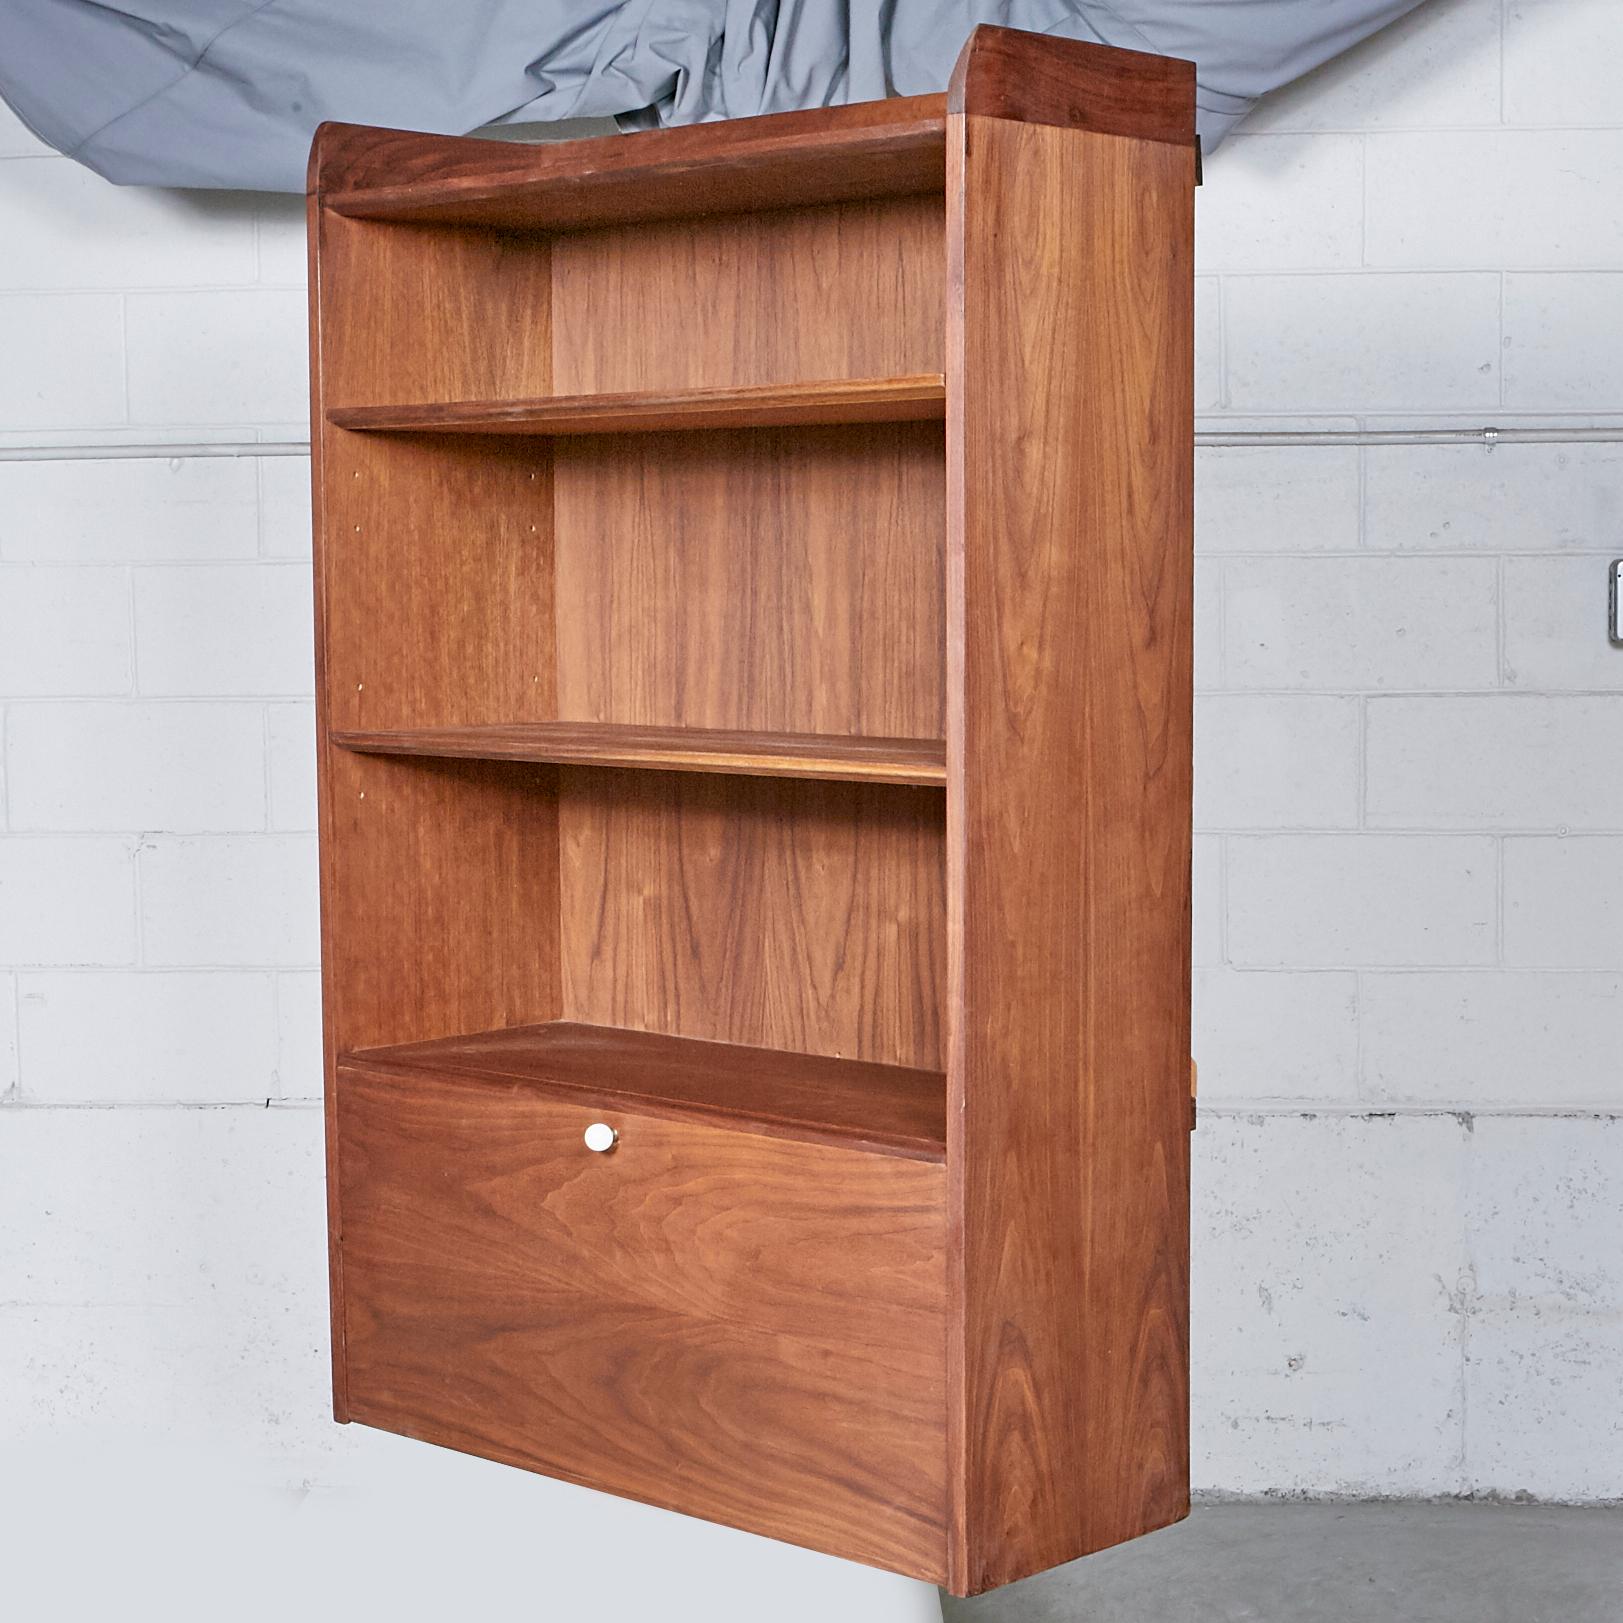 Drexel Floating Wall Cabinet Desk by Kipp Stewart In Excellent Condition For Sale In Amherst, NH